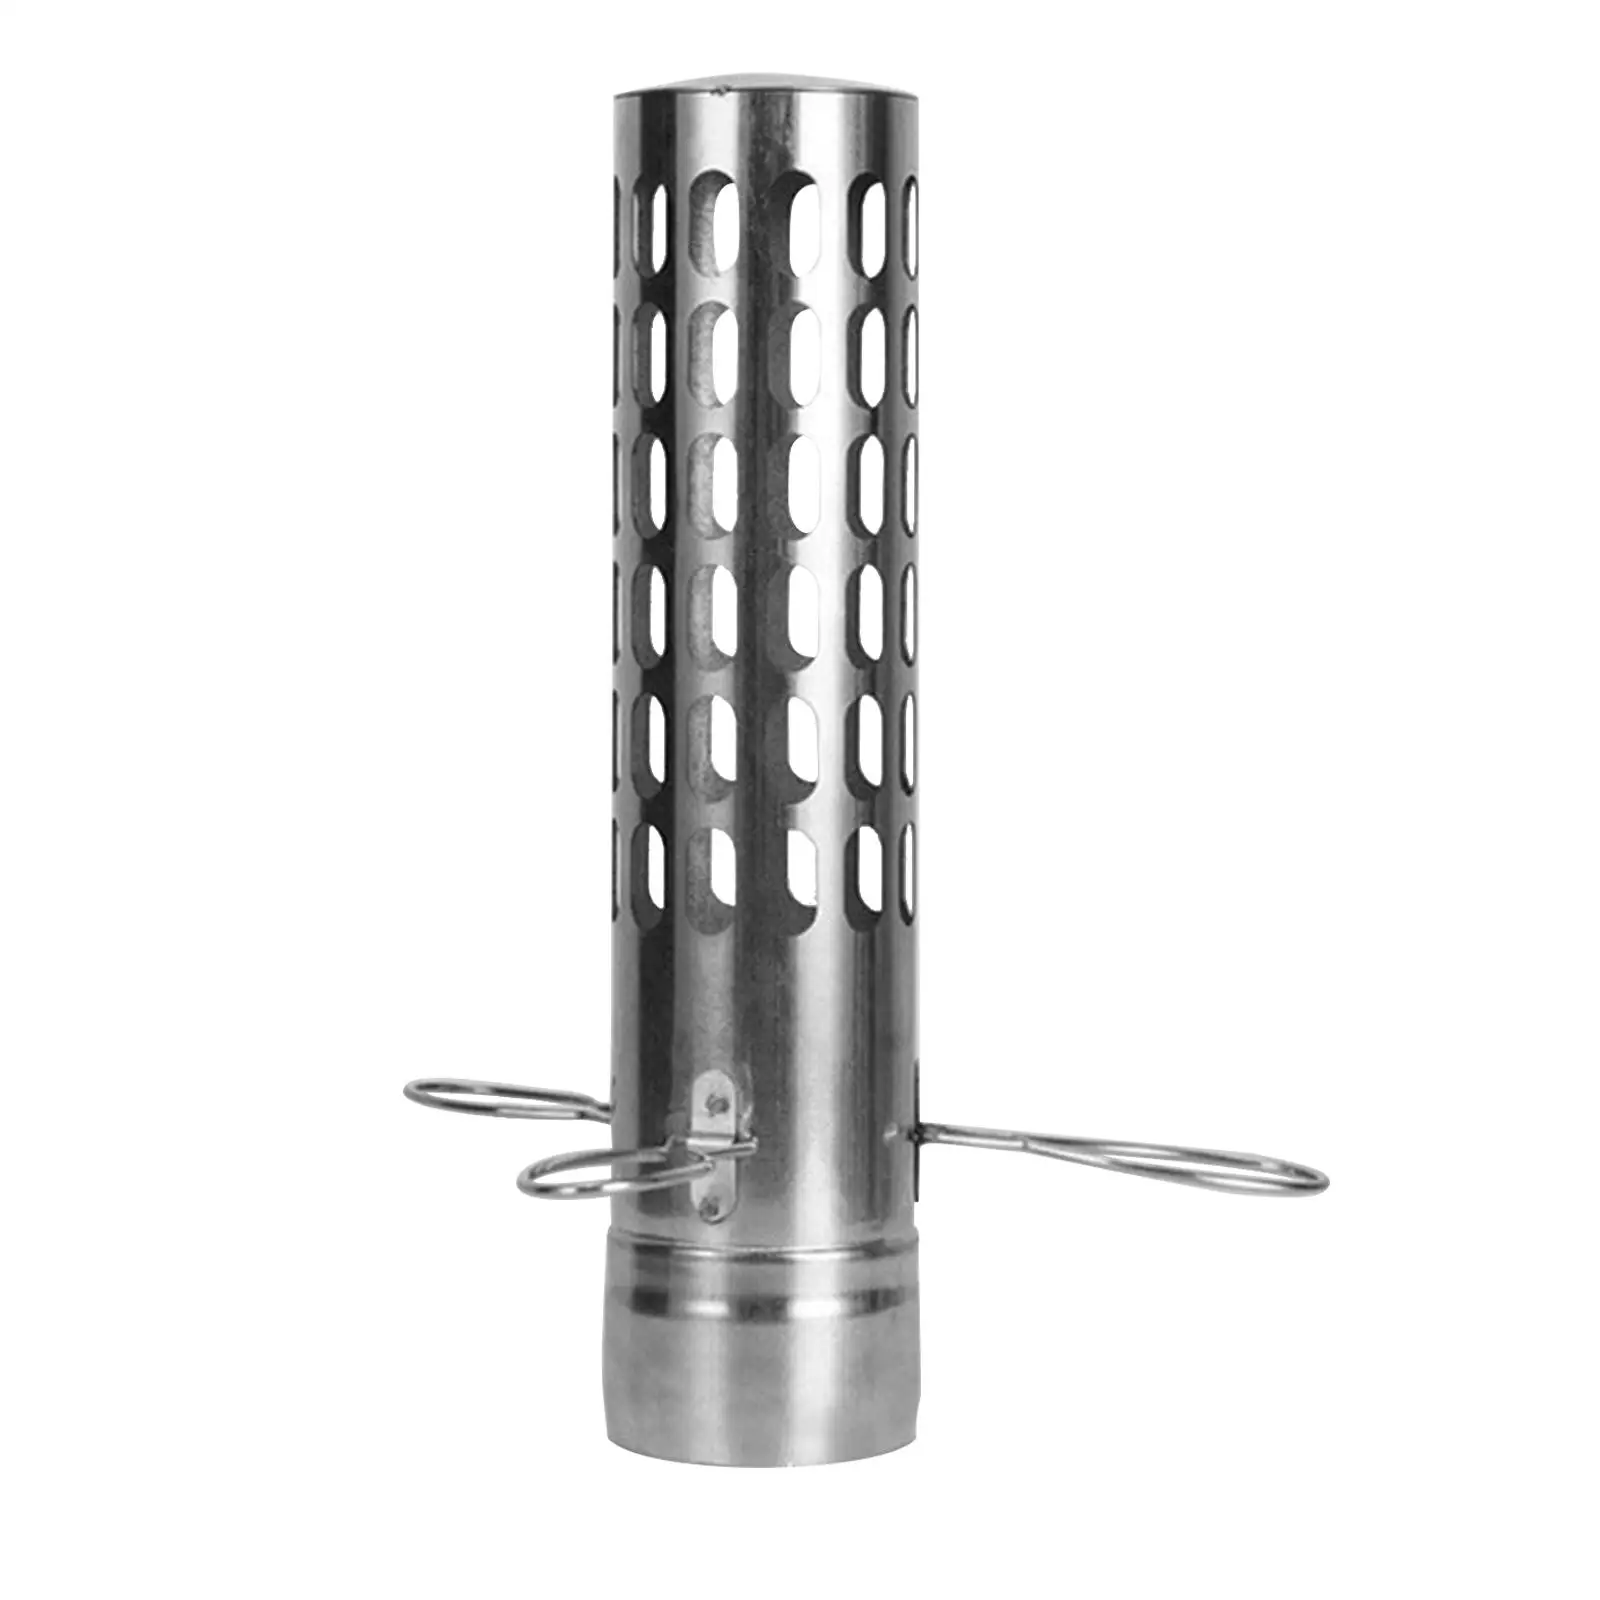 Durable Stove Chimney Accessories Gas Furnace Tube Exhaust for camping Cooking burning Stove Burner